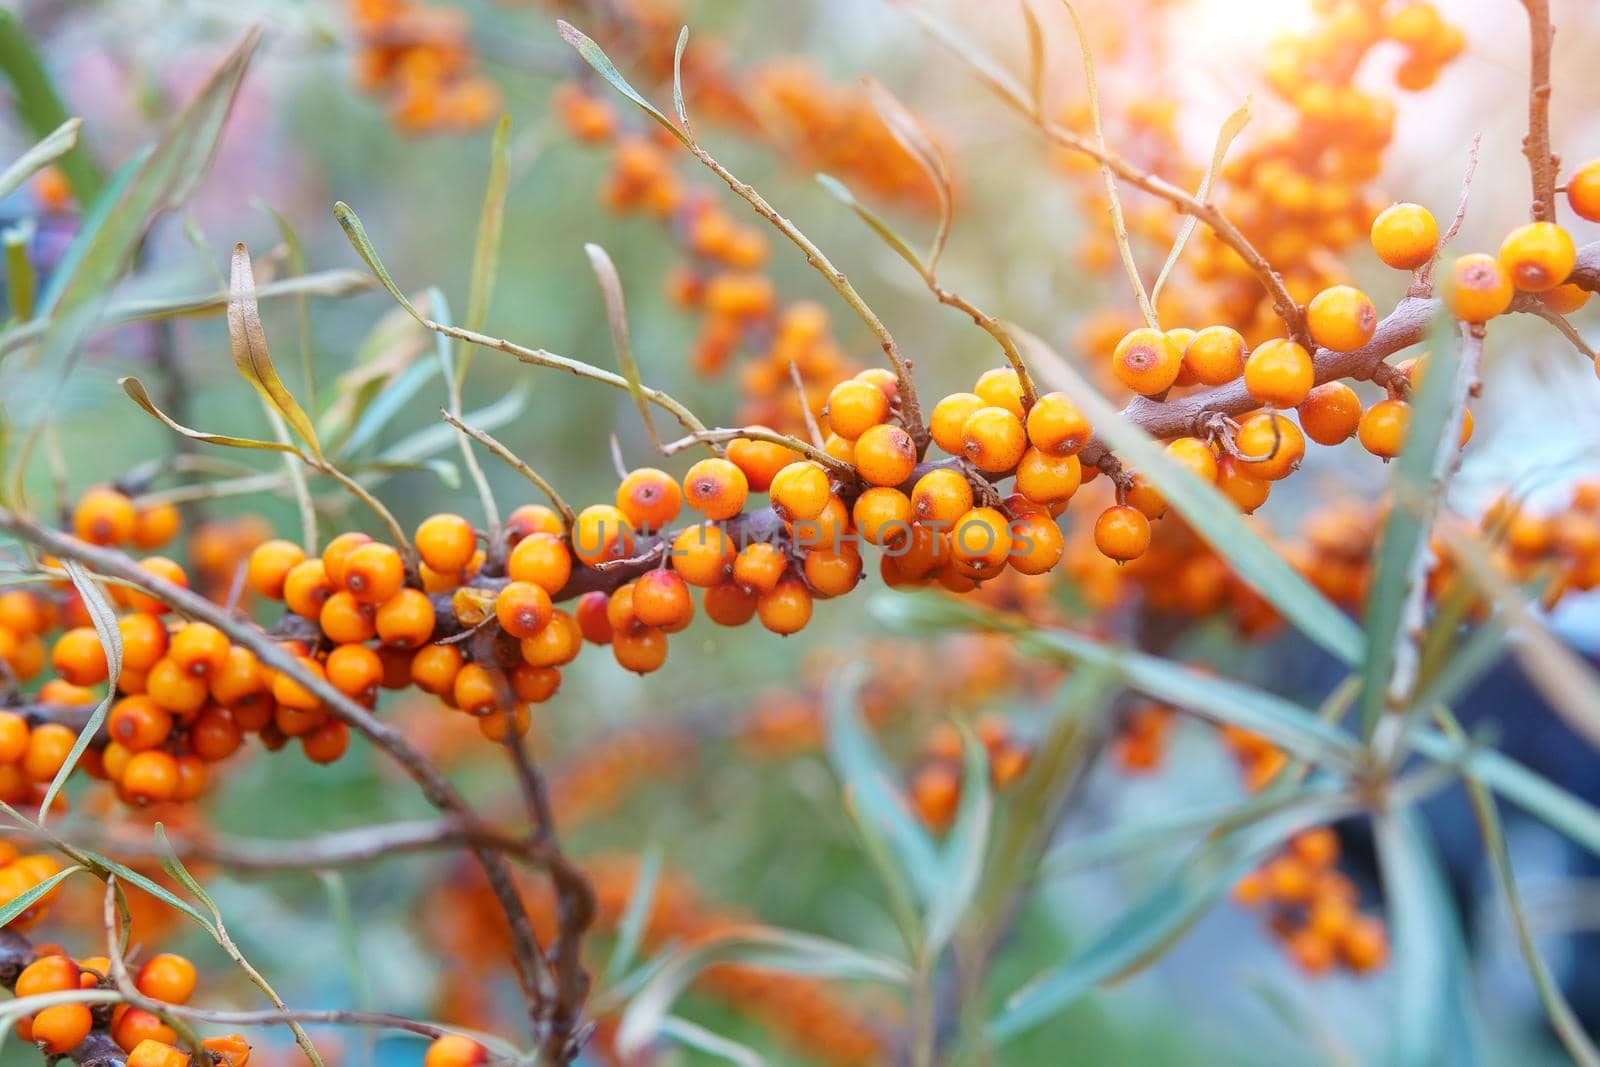 Sea buckthorn growing on a tree close up Hippophae rhamnoides. Medical plant by darksoul72